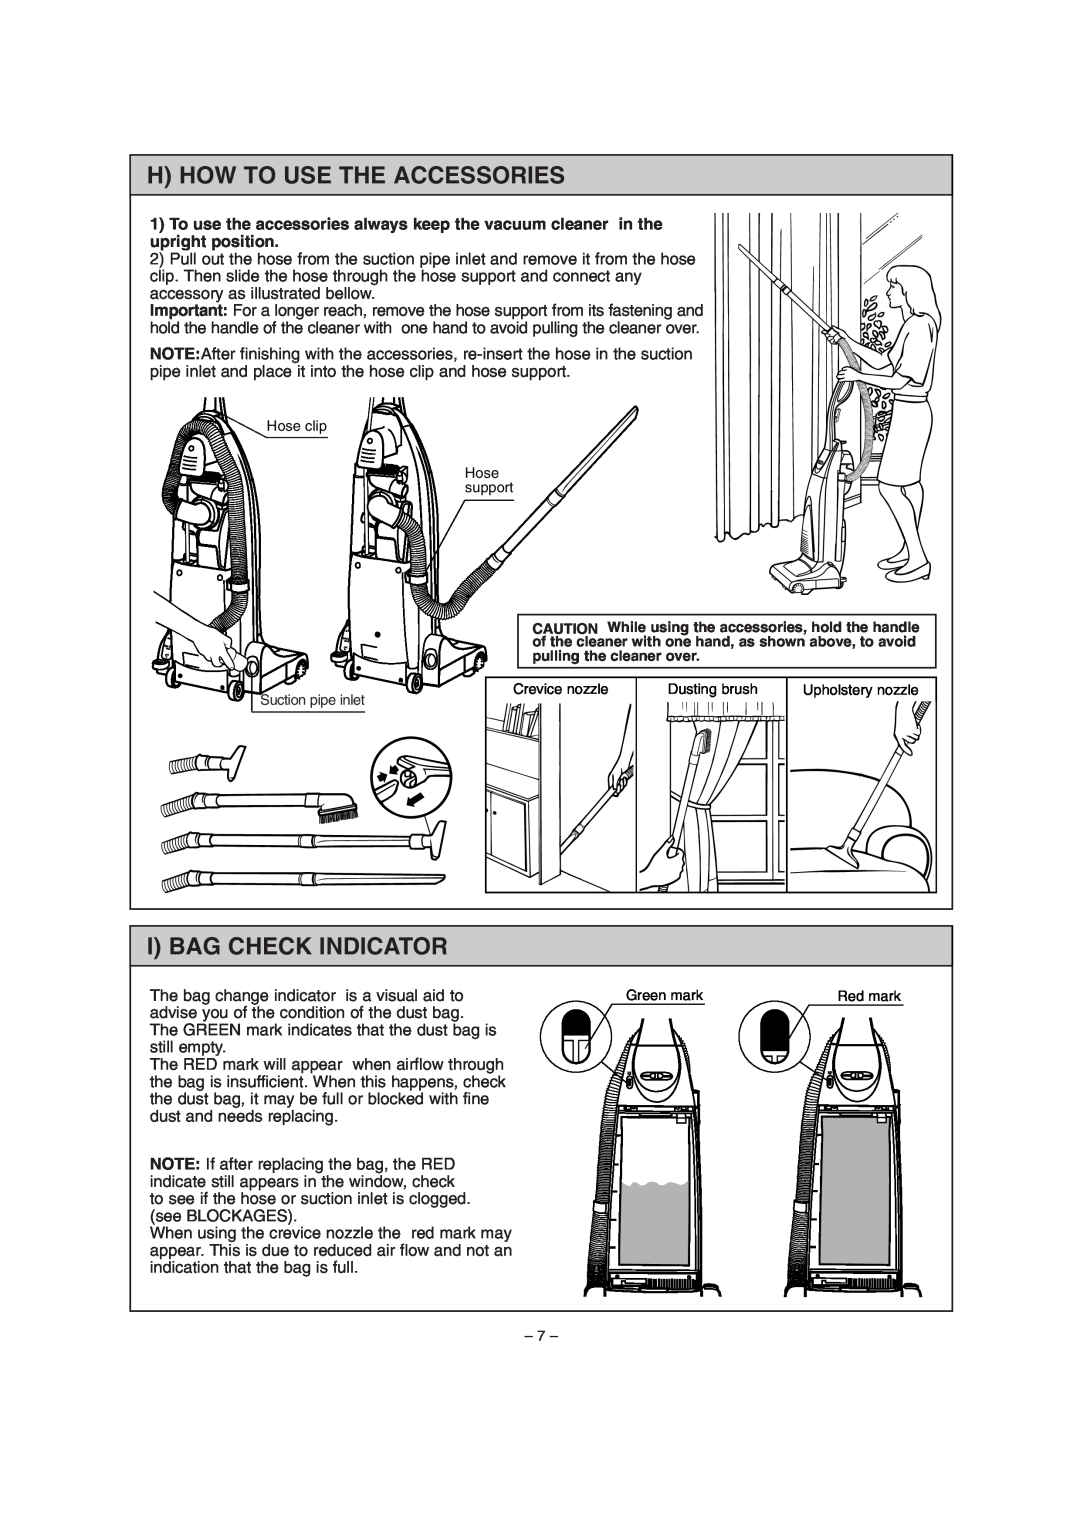 Miele S179i important safety instructions H How To Use The Accessories, I Bag Check Indicator 